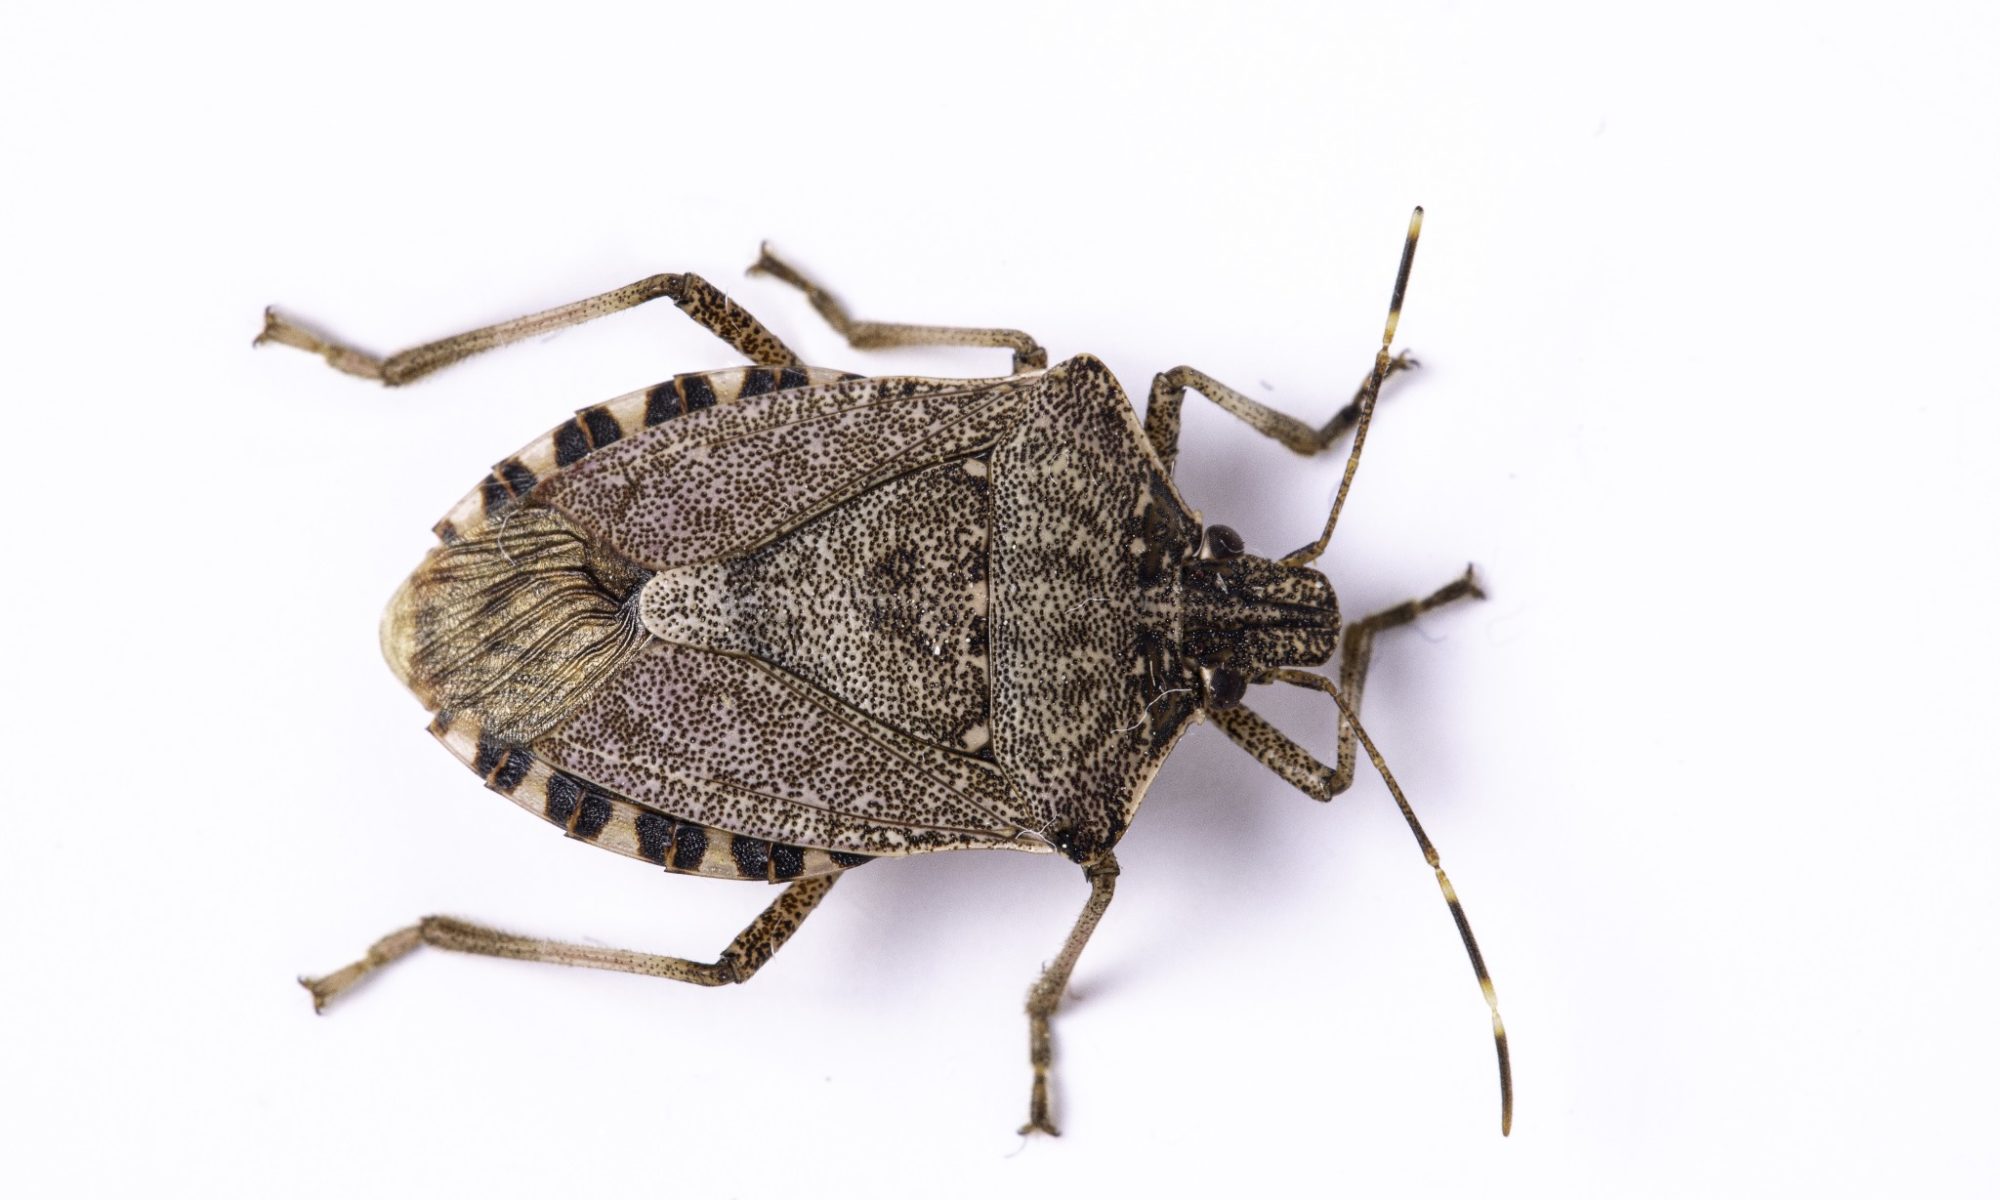 A stink bug on a white background